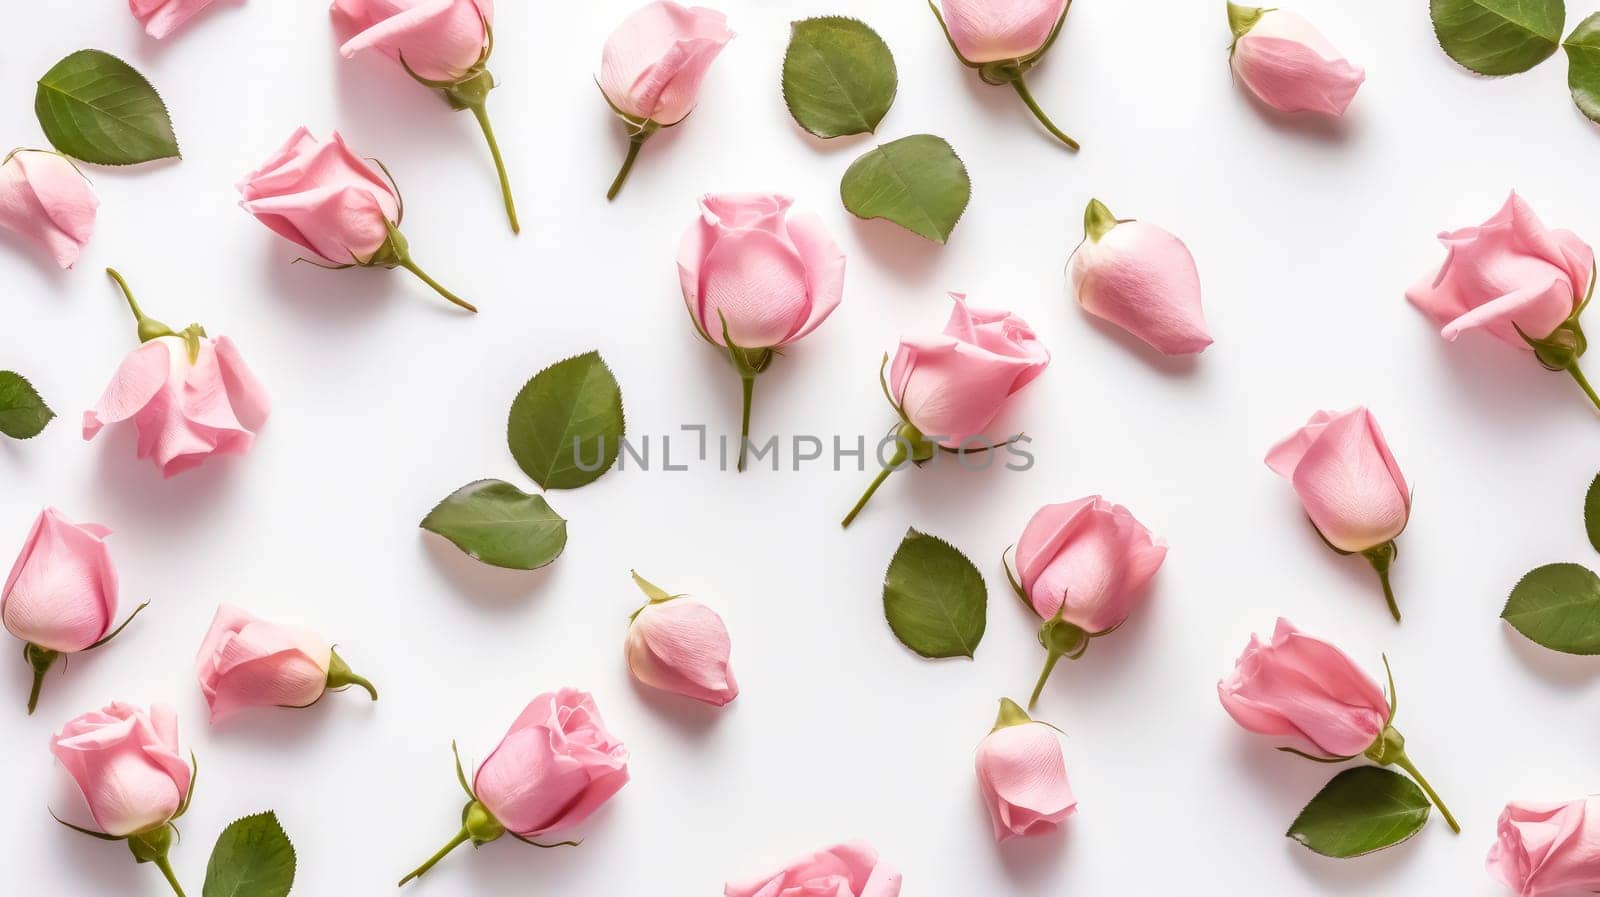 a delicate framework made of roses on a clean white background. by Alla_Morozova93